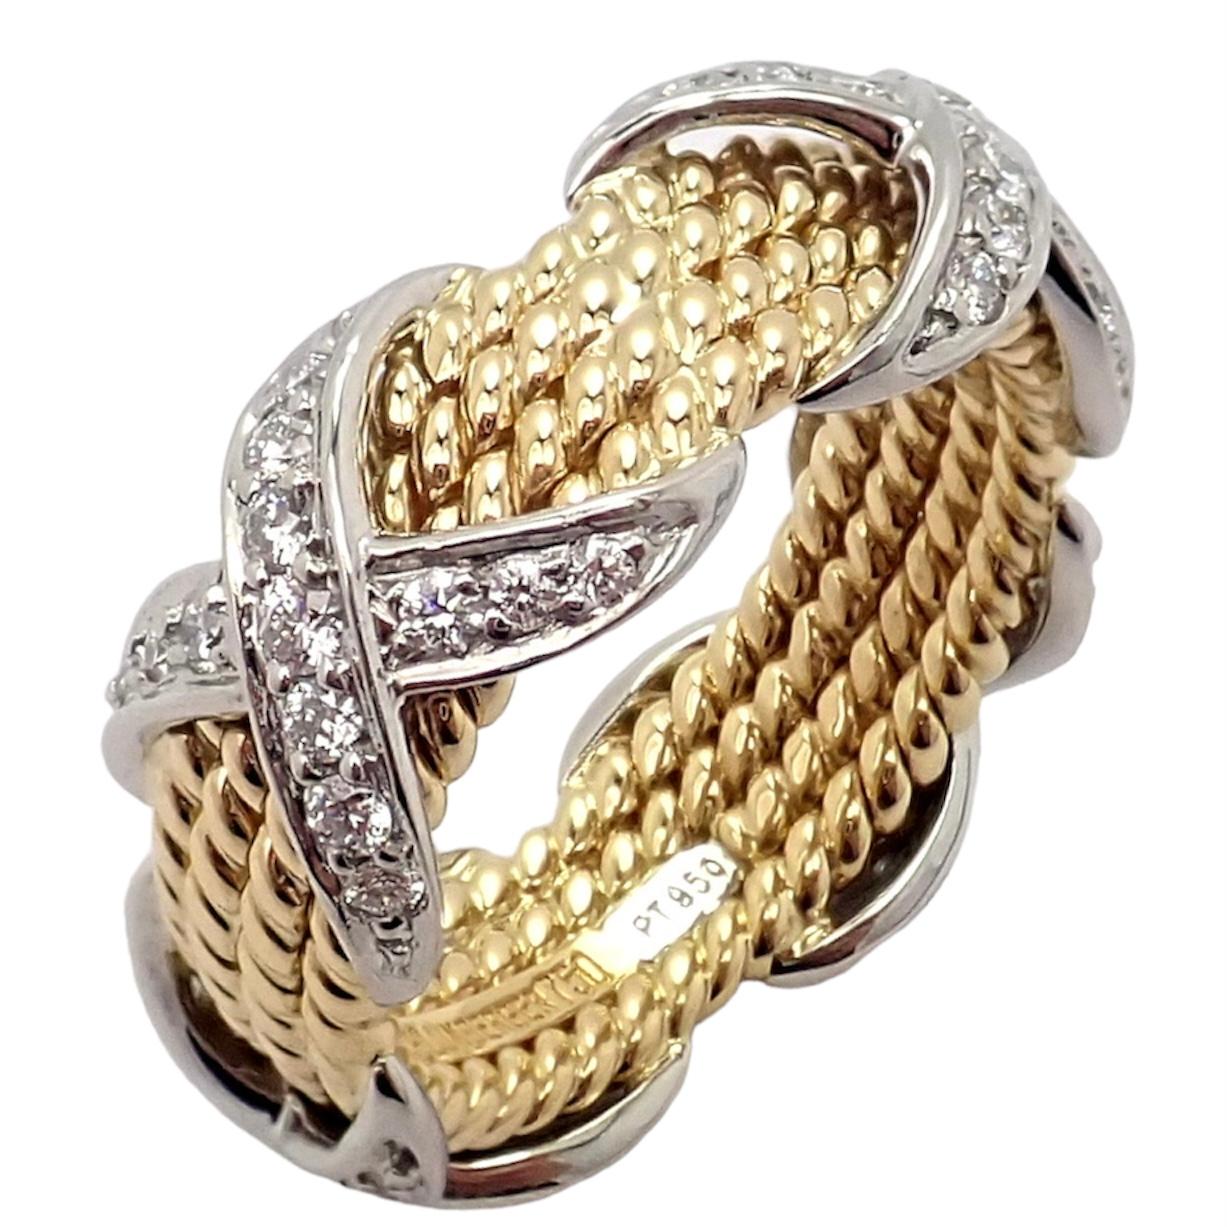 18k Yellow Gold And Platinum Diamond Four Row Band Ring by Tiffany & Co. Part of Tiffany & Co's famous collection by Jean Schlumberger. 

With 52 diamonds, VS1 clarity, G color. Total Diamond Weight: 1.25ct.

Details: 
Ring Size: 6.5
Weight: